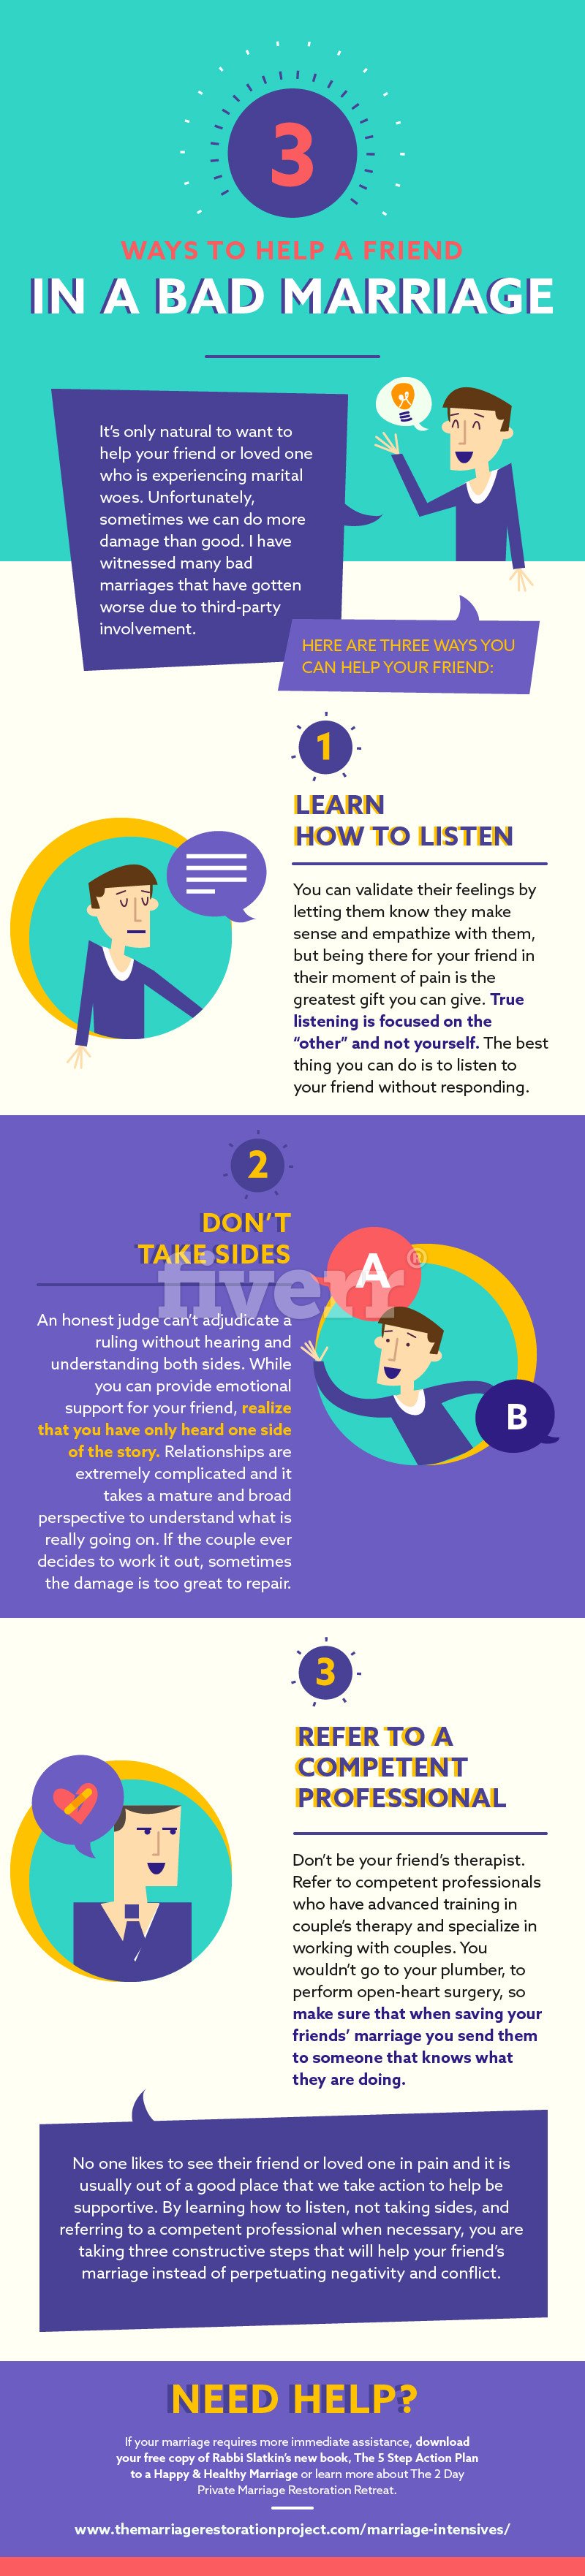 INFOGRAPHIC: Three Ways to Help a Friend in a Bad Marriage